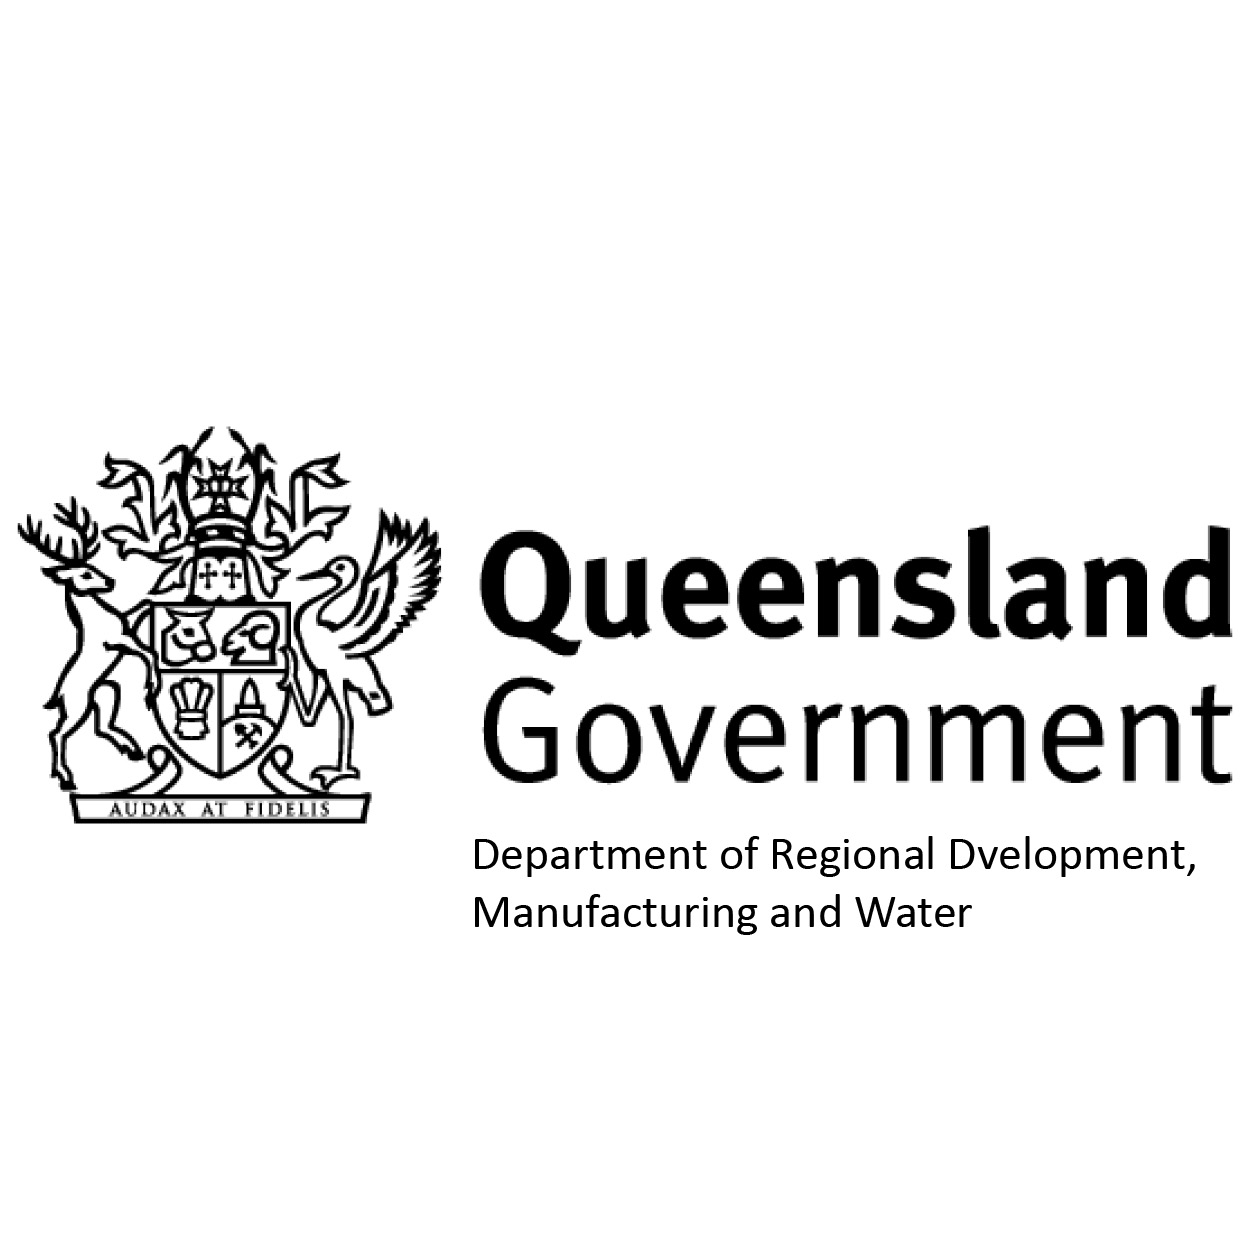 Department of Regional Development Manufacturing and water